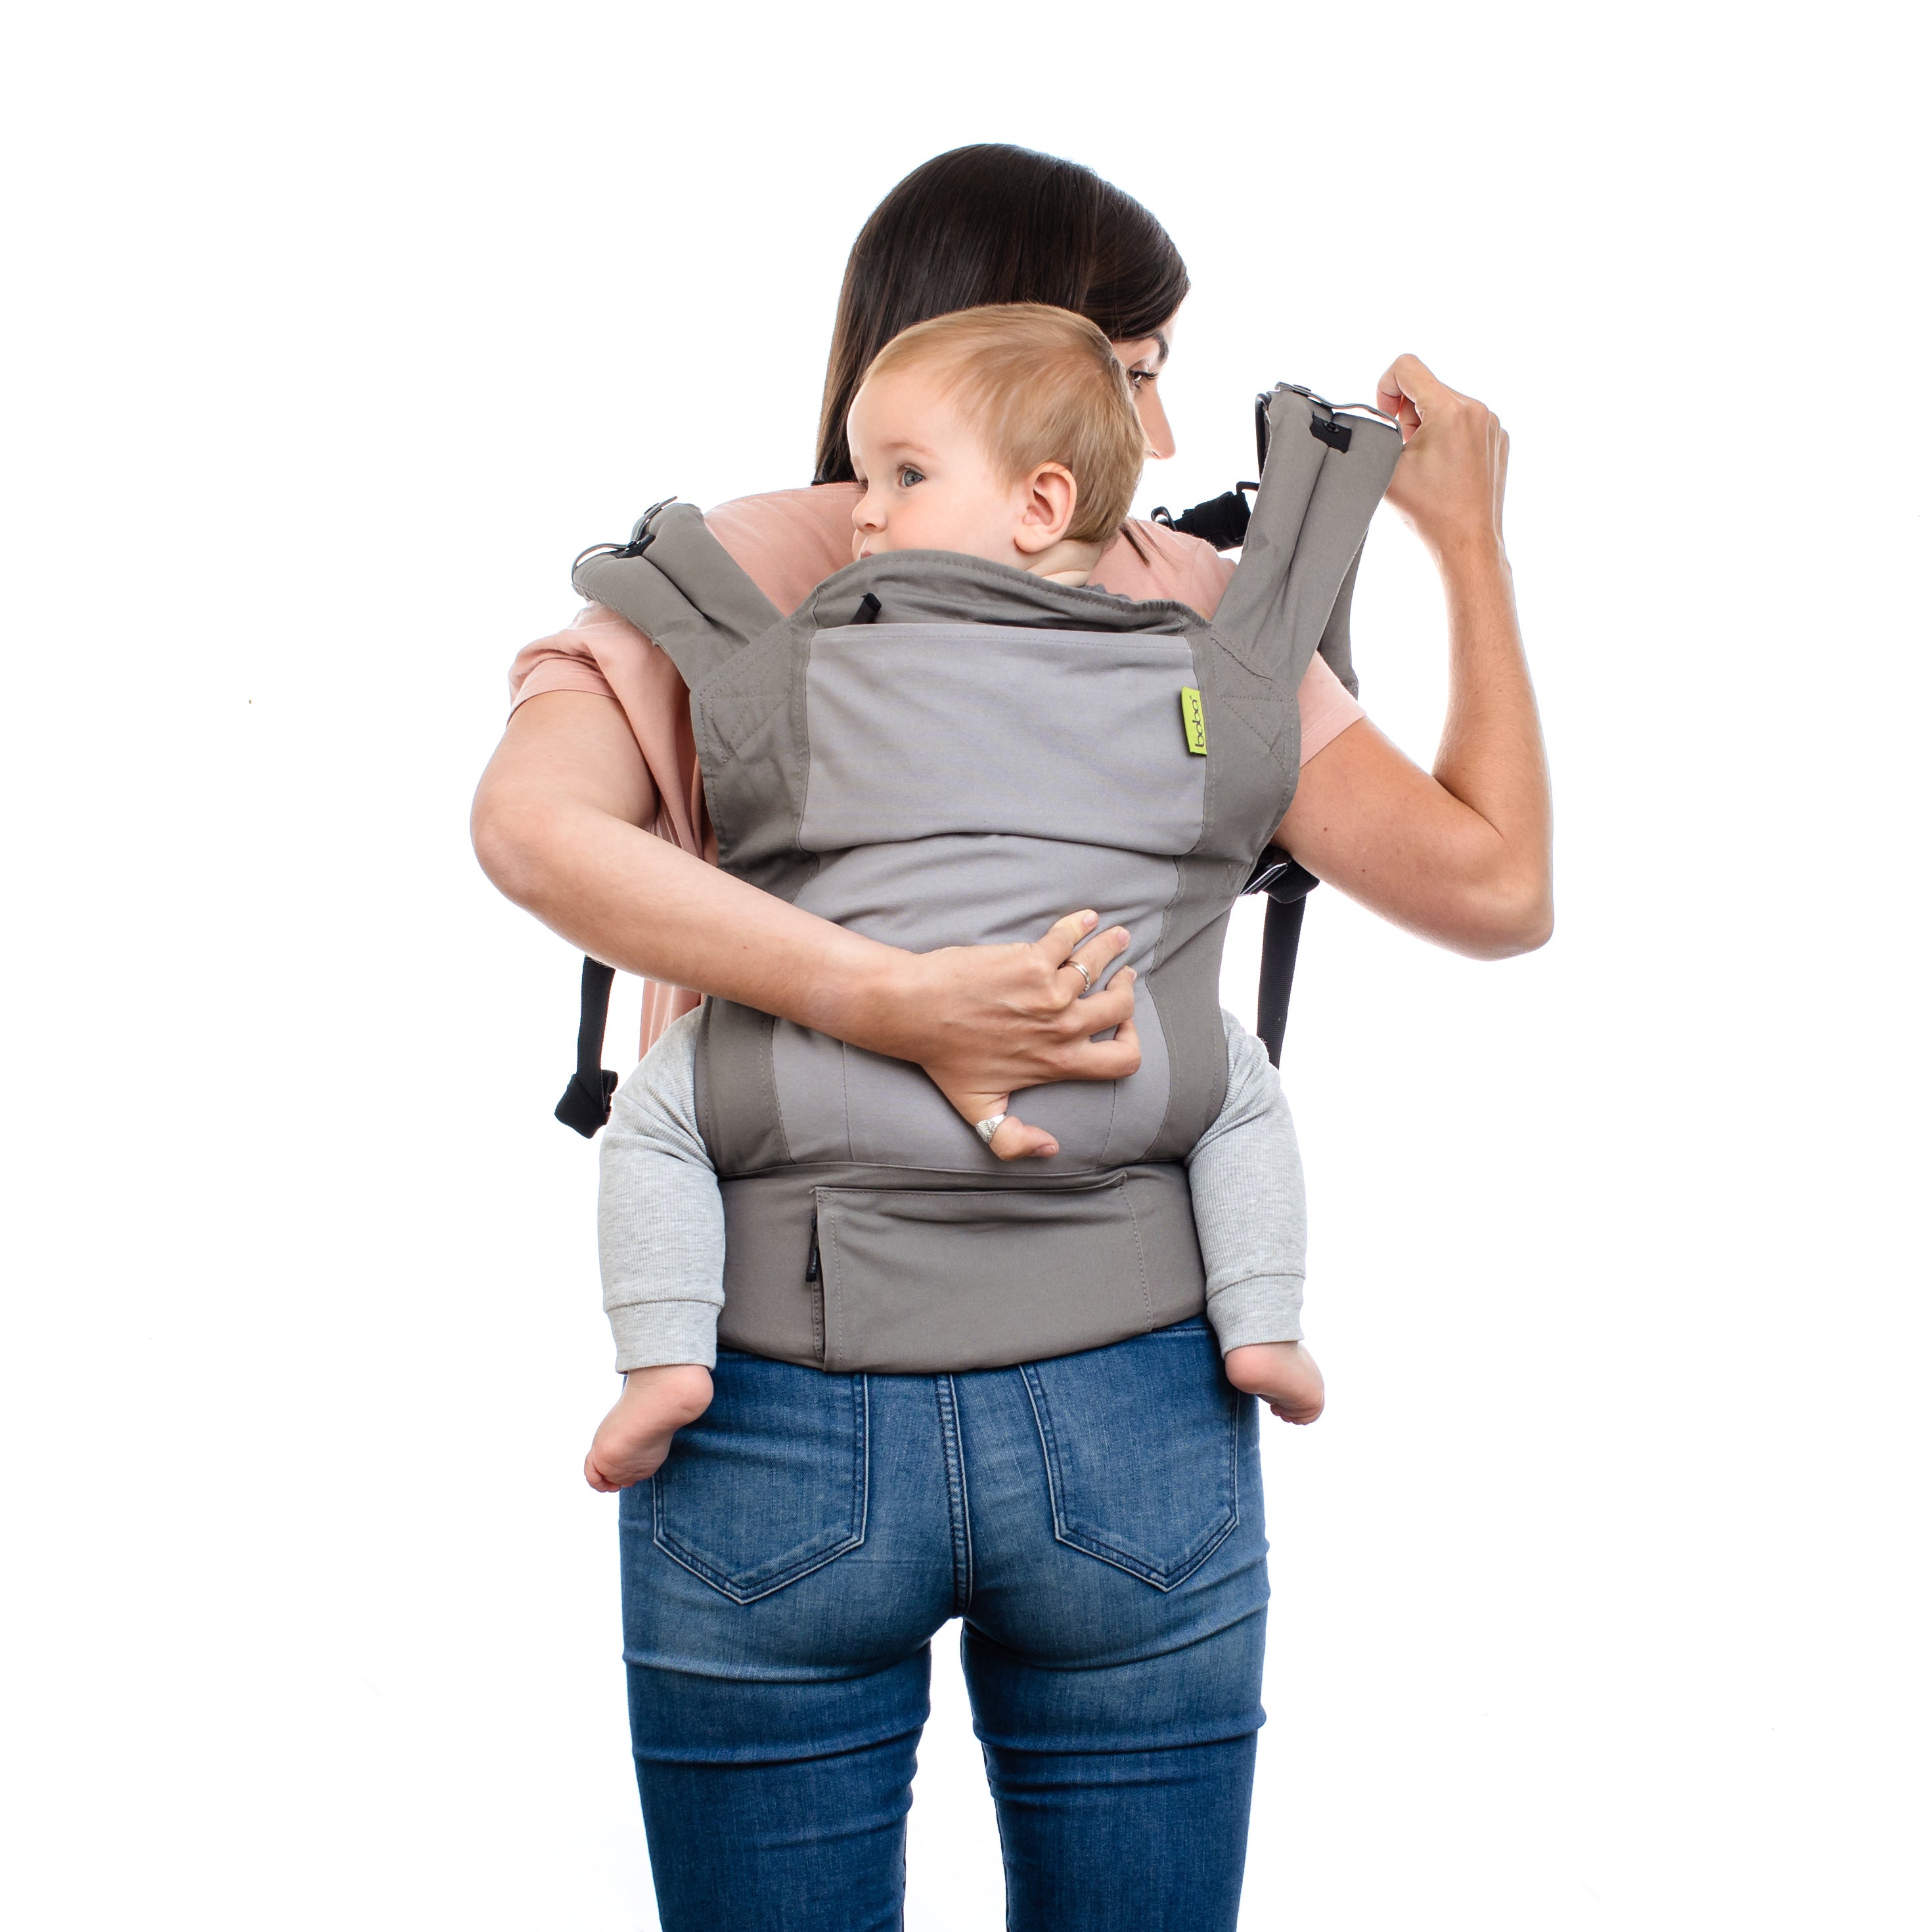 A joyful mama with brown short hair is putting her little boy in the ergonomic and practical back carry in the gray 4gs dusk infant carrier.